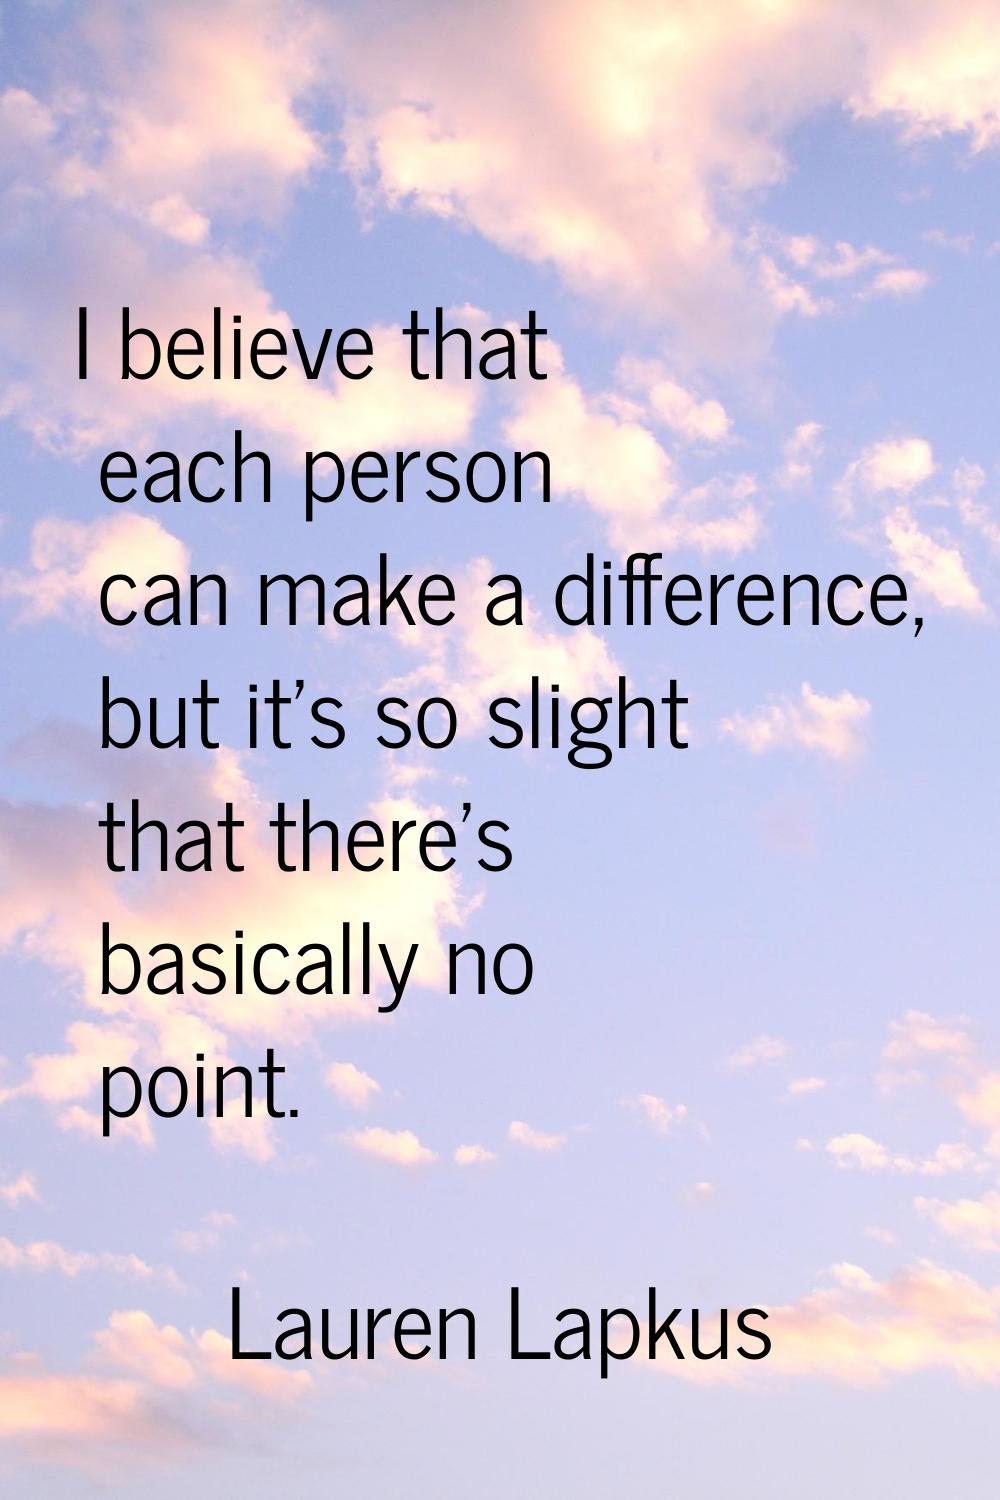 I believe that each person can make a difference, but it's so slight that there's basically no poin